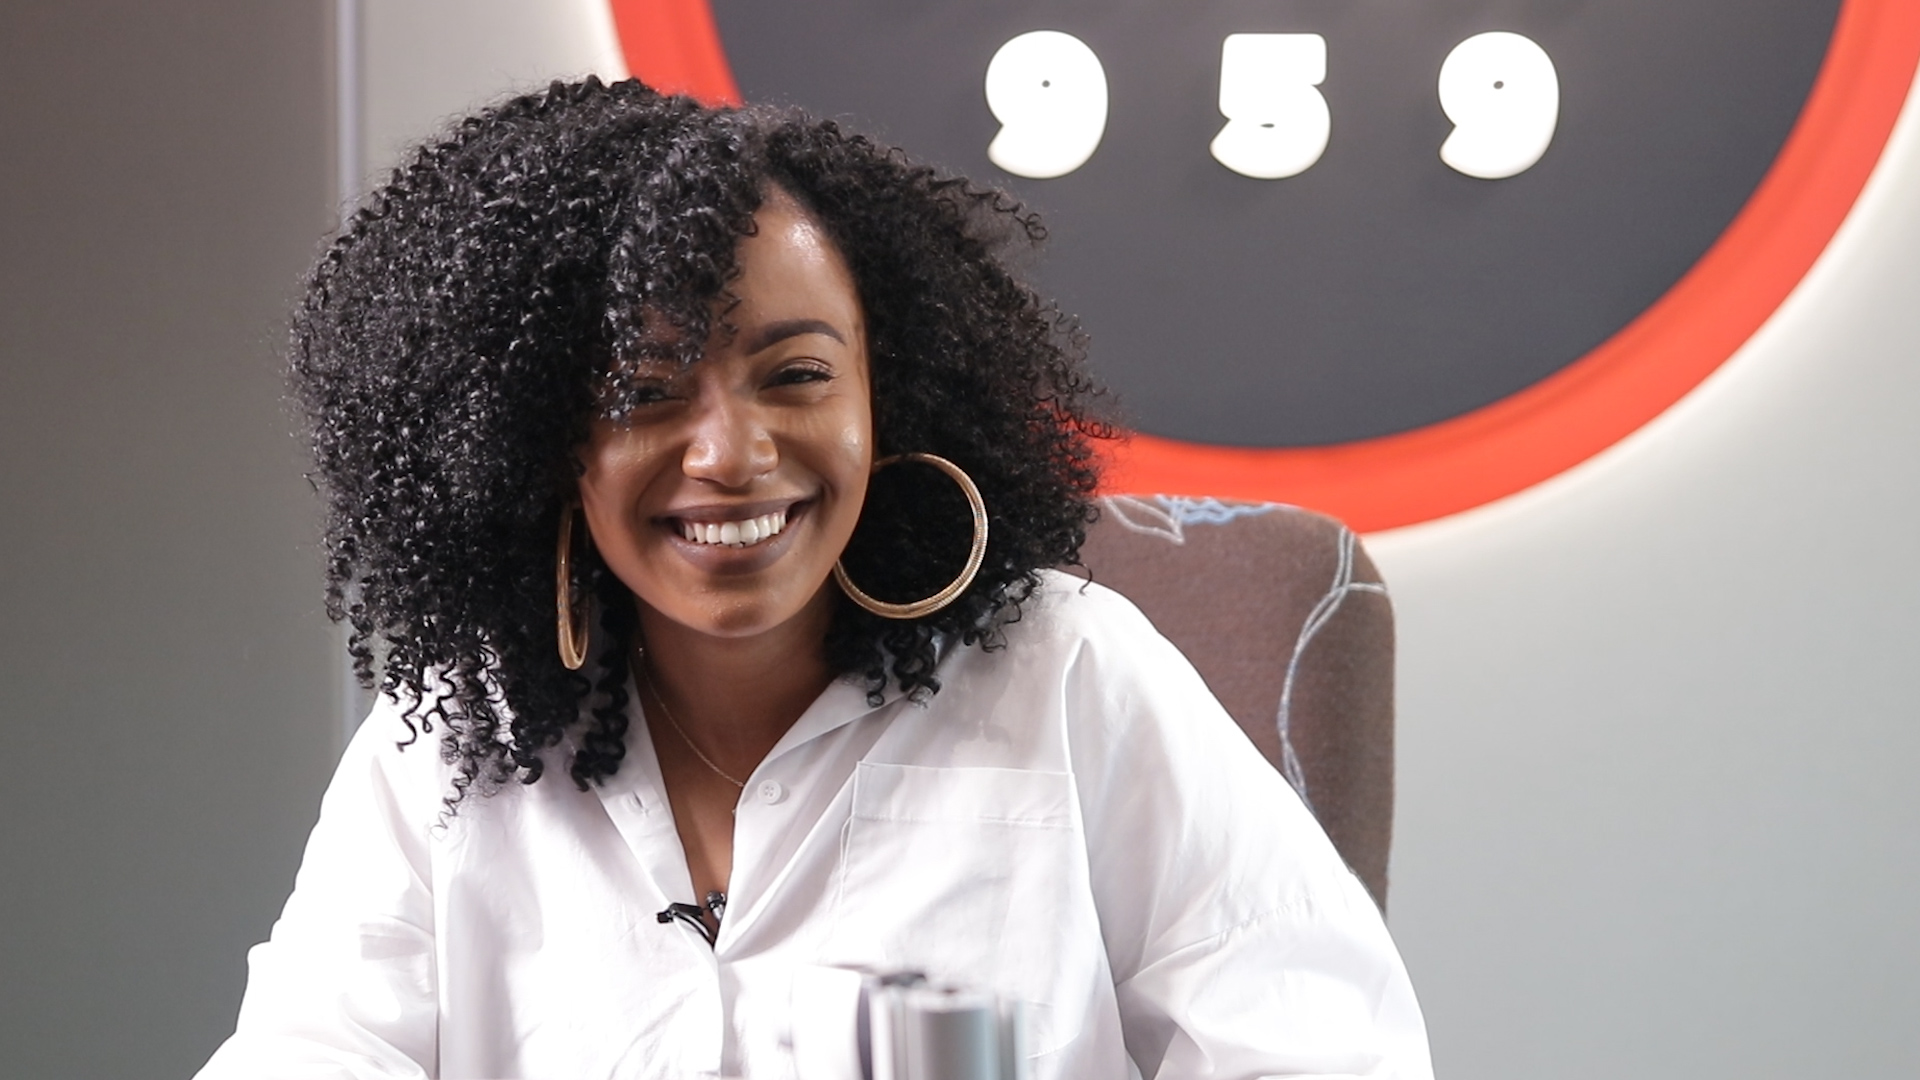 WATCH: Get to know Tyroline G Franks – New presenter of G’s Up on Kaya 959